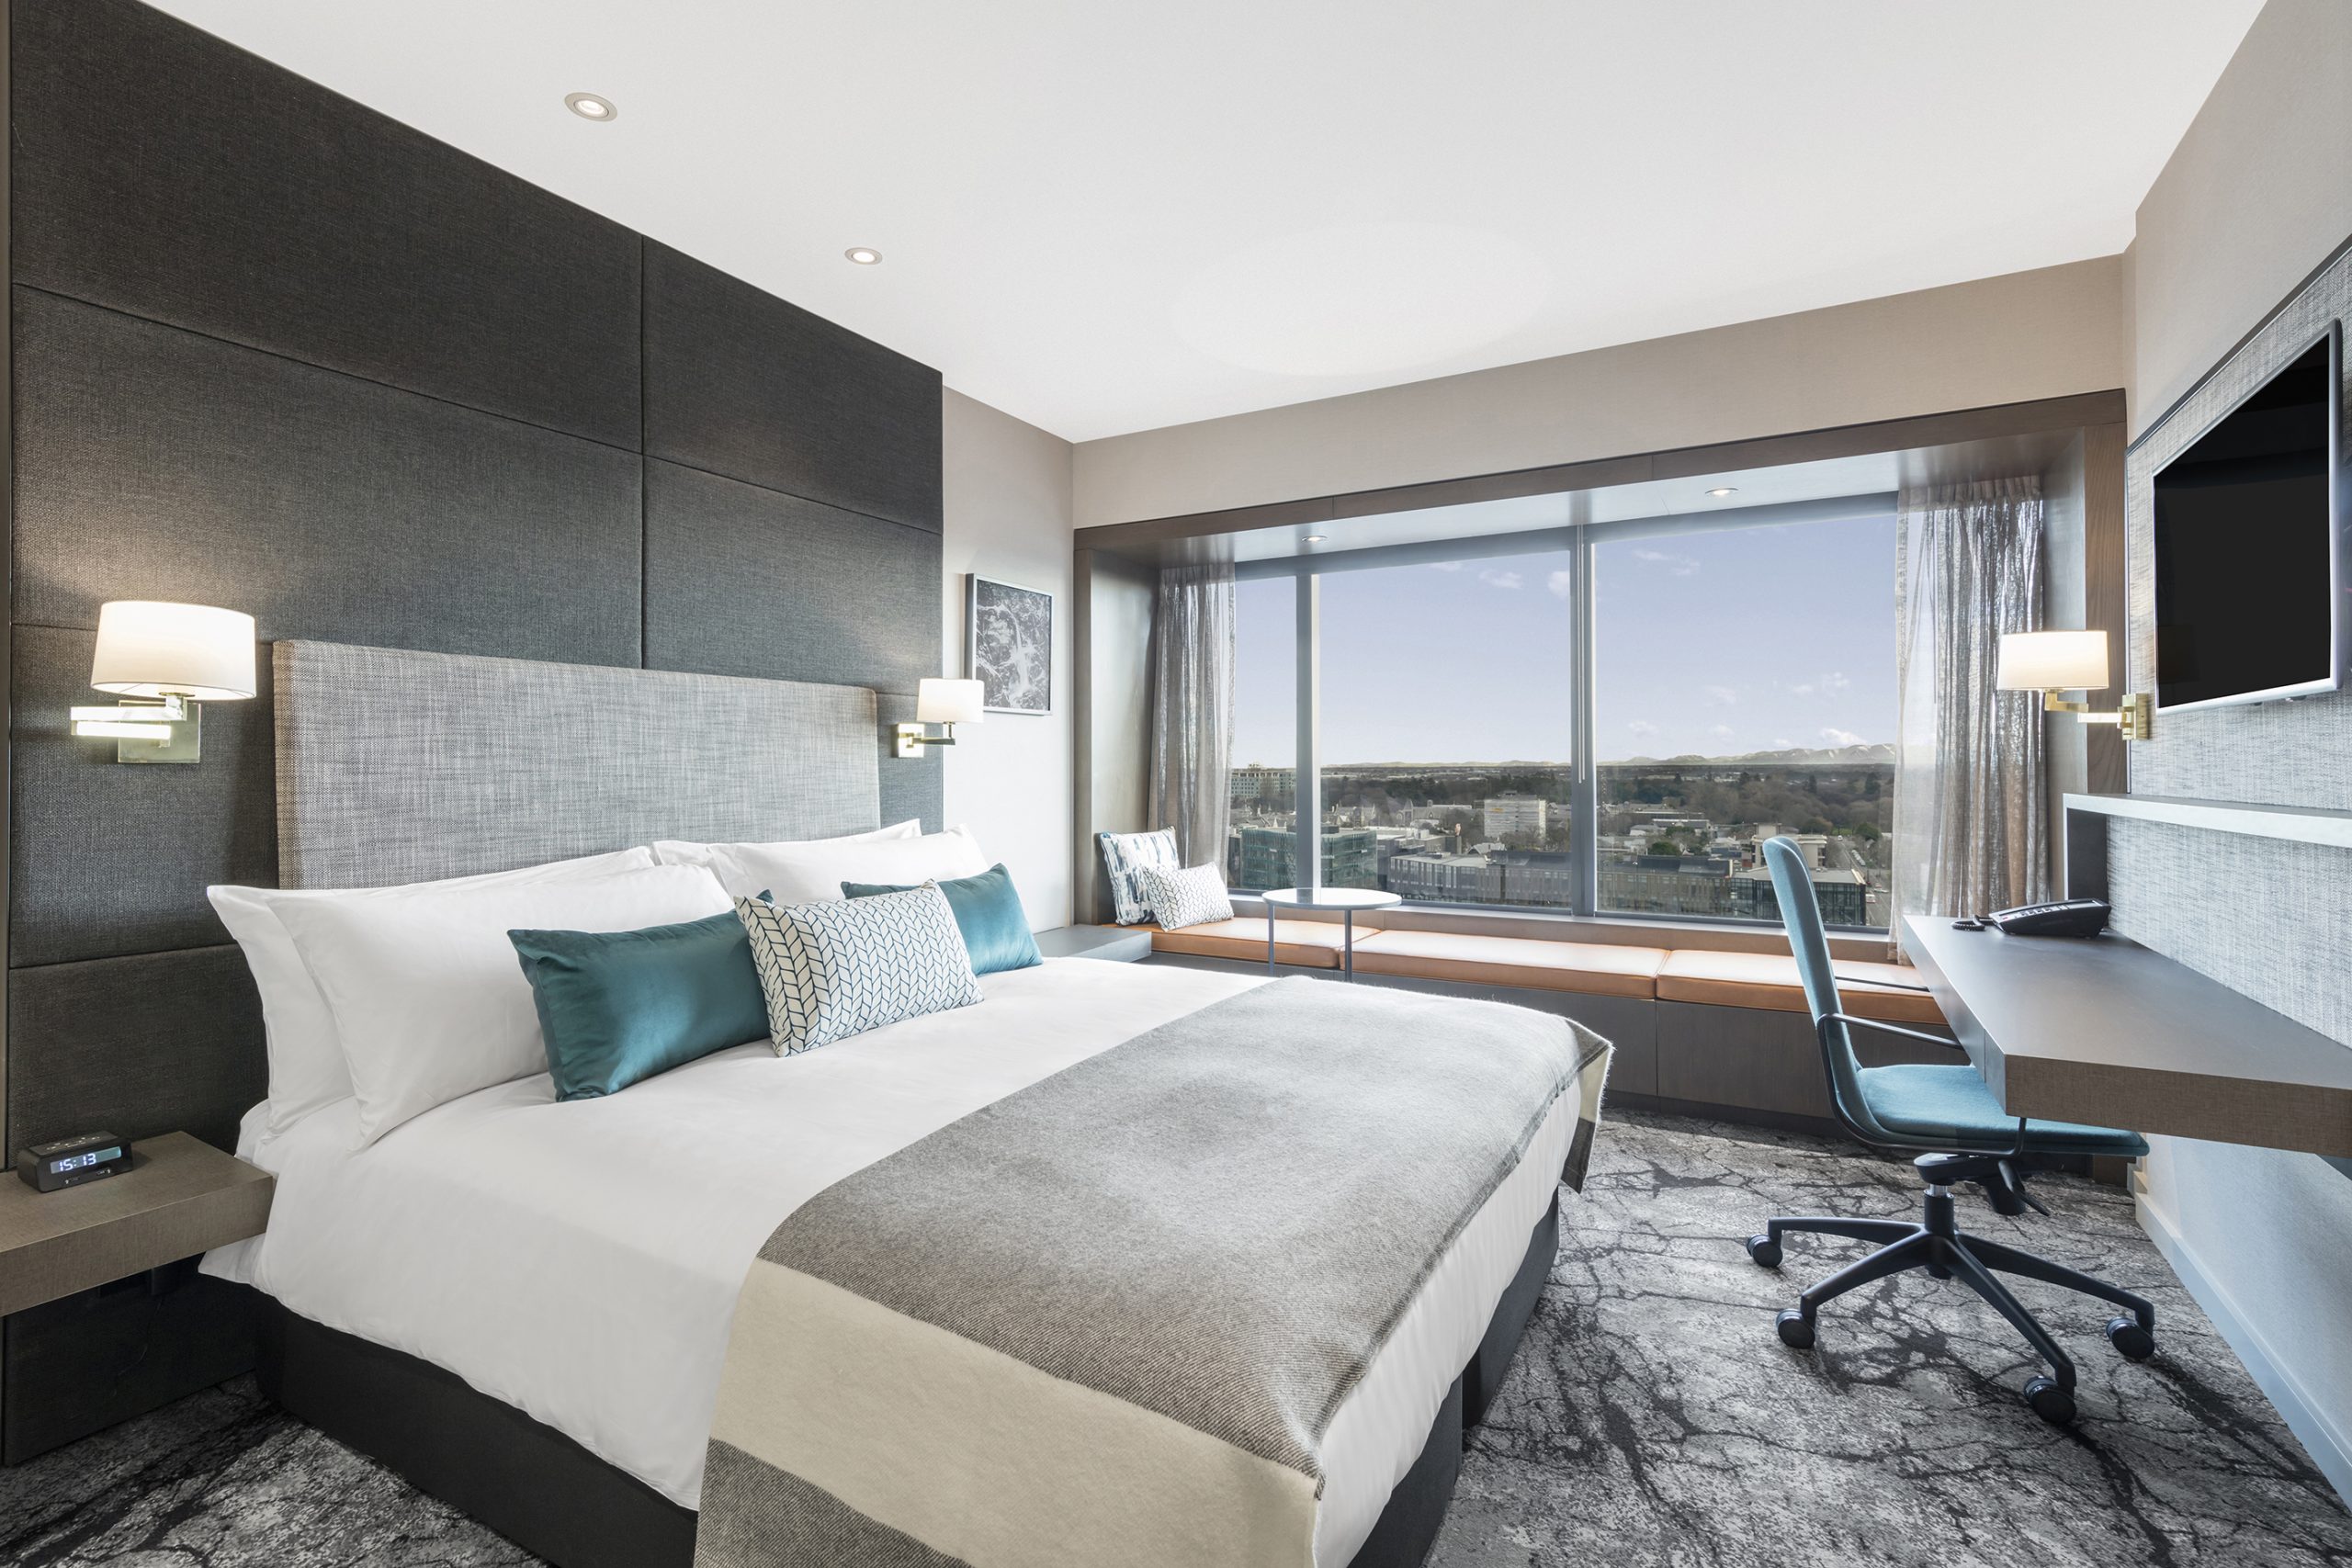 Accommodation & Hotel Room at Crowne Plaza Christchurch